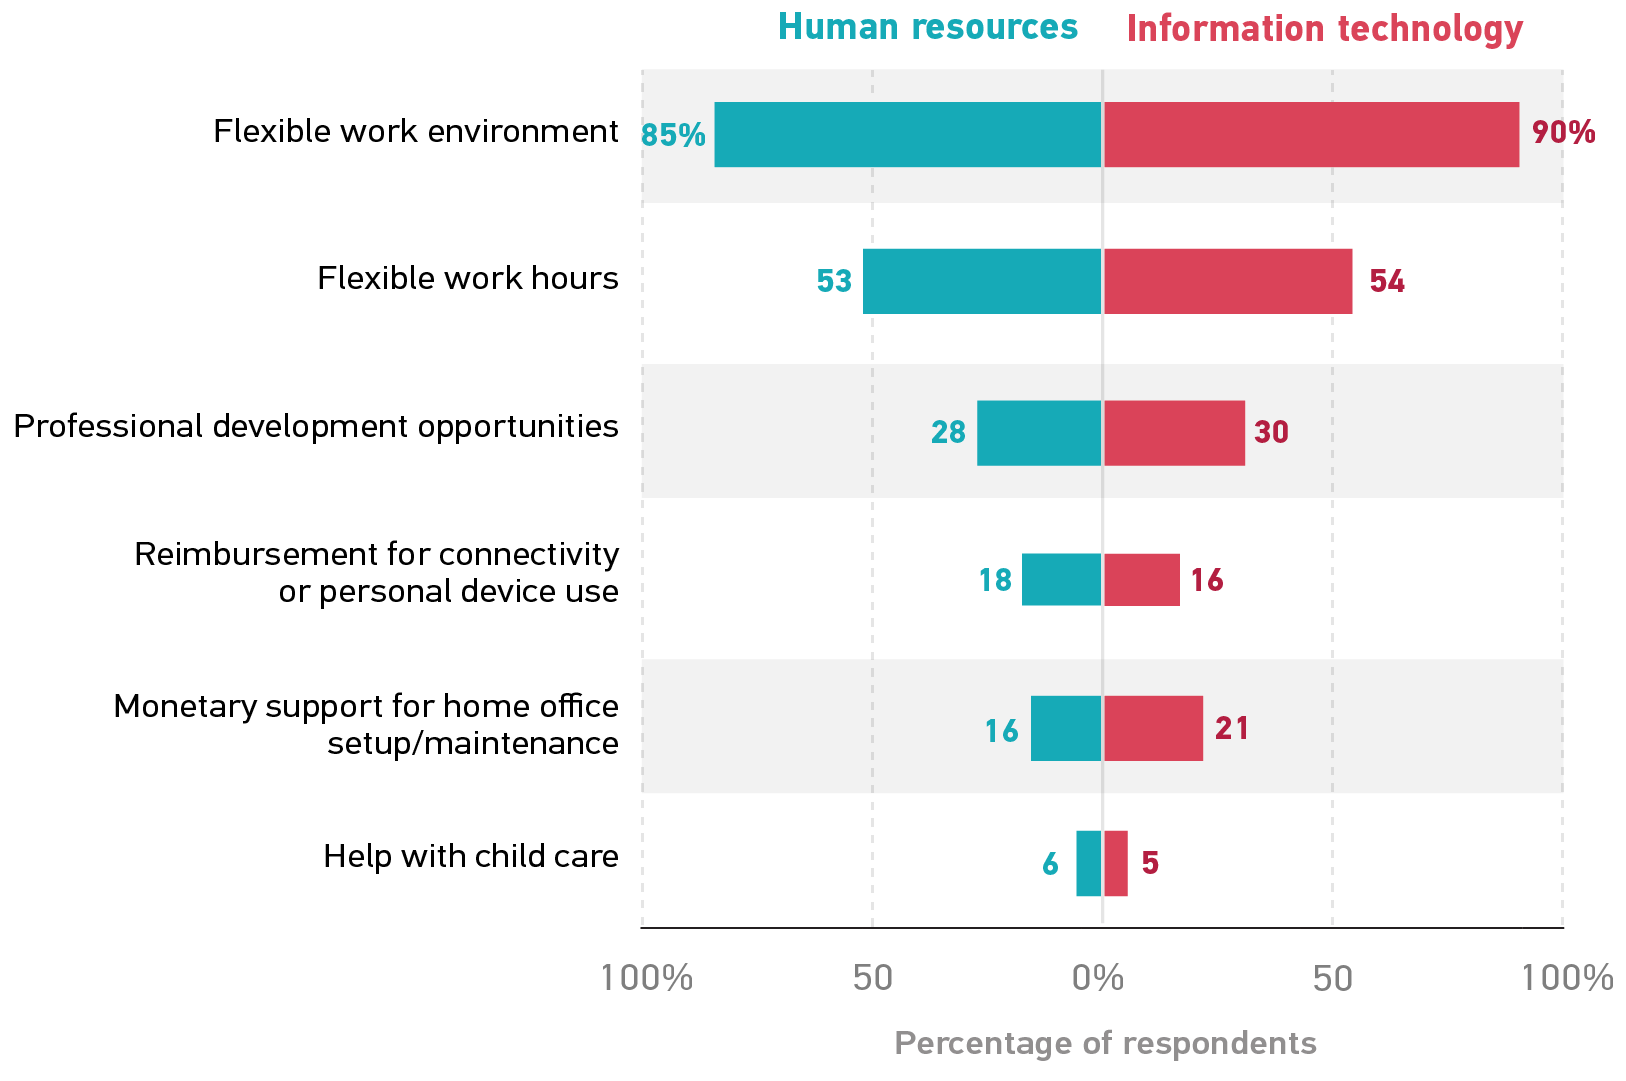 bar graph showing the percentage of HR and IT professionals who responded in each category. 
Flexible work environment: HR 85%, IT 90%. 
Flexible work hours: HR 53%, IT 54%. 
Professional development opportunities: HR 28%, IT 30%. 
Reimbursement for connectivity or personal device use: HR 18%, IT 16%. 
Monetary support for home office setup/maintenance: HR 16%, IT 21%. 
Help with child care: HR 6%, IT 5%. 